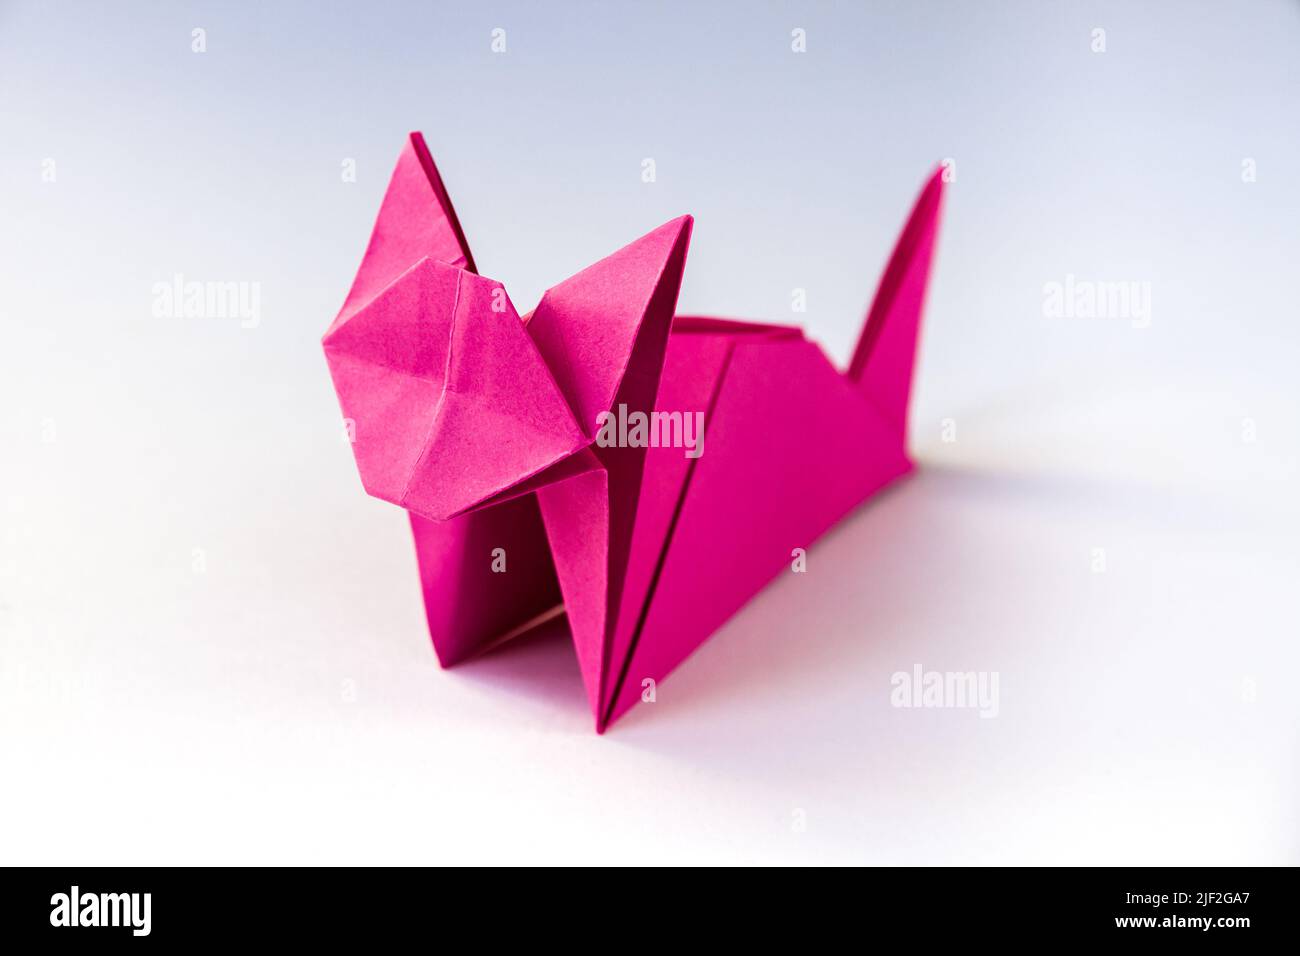 Pink paper cat origami isolated on a blank white background. Stock Photo